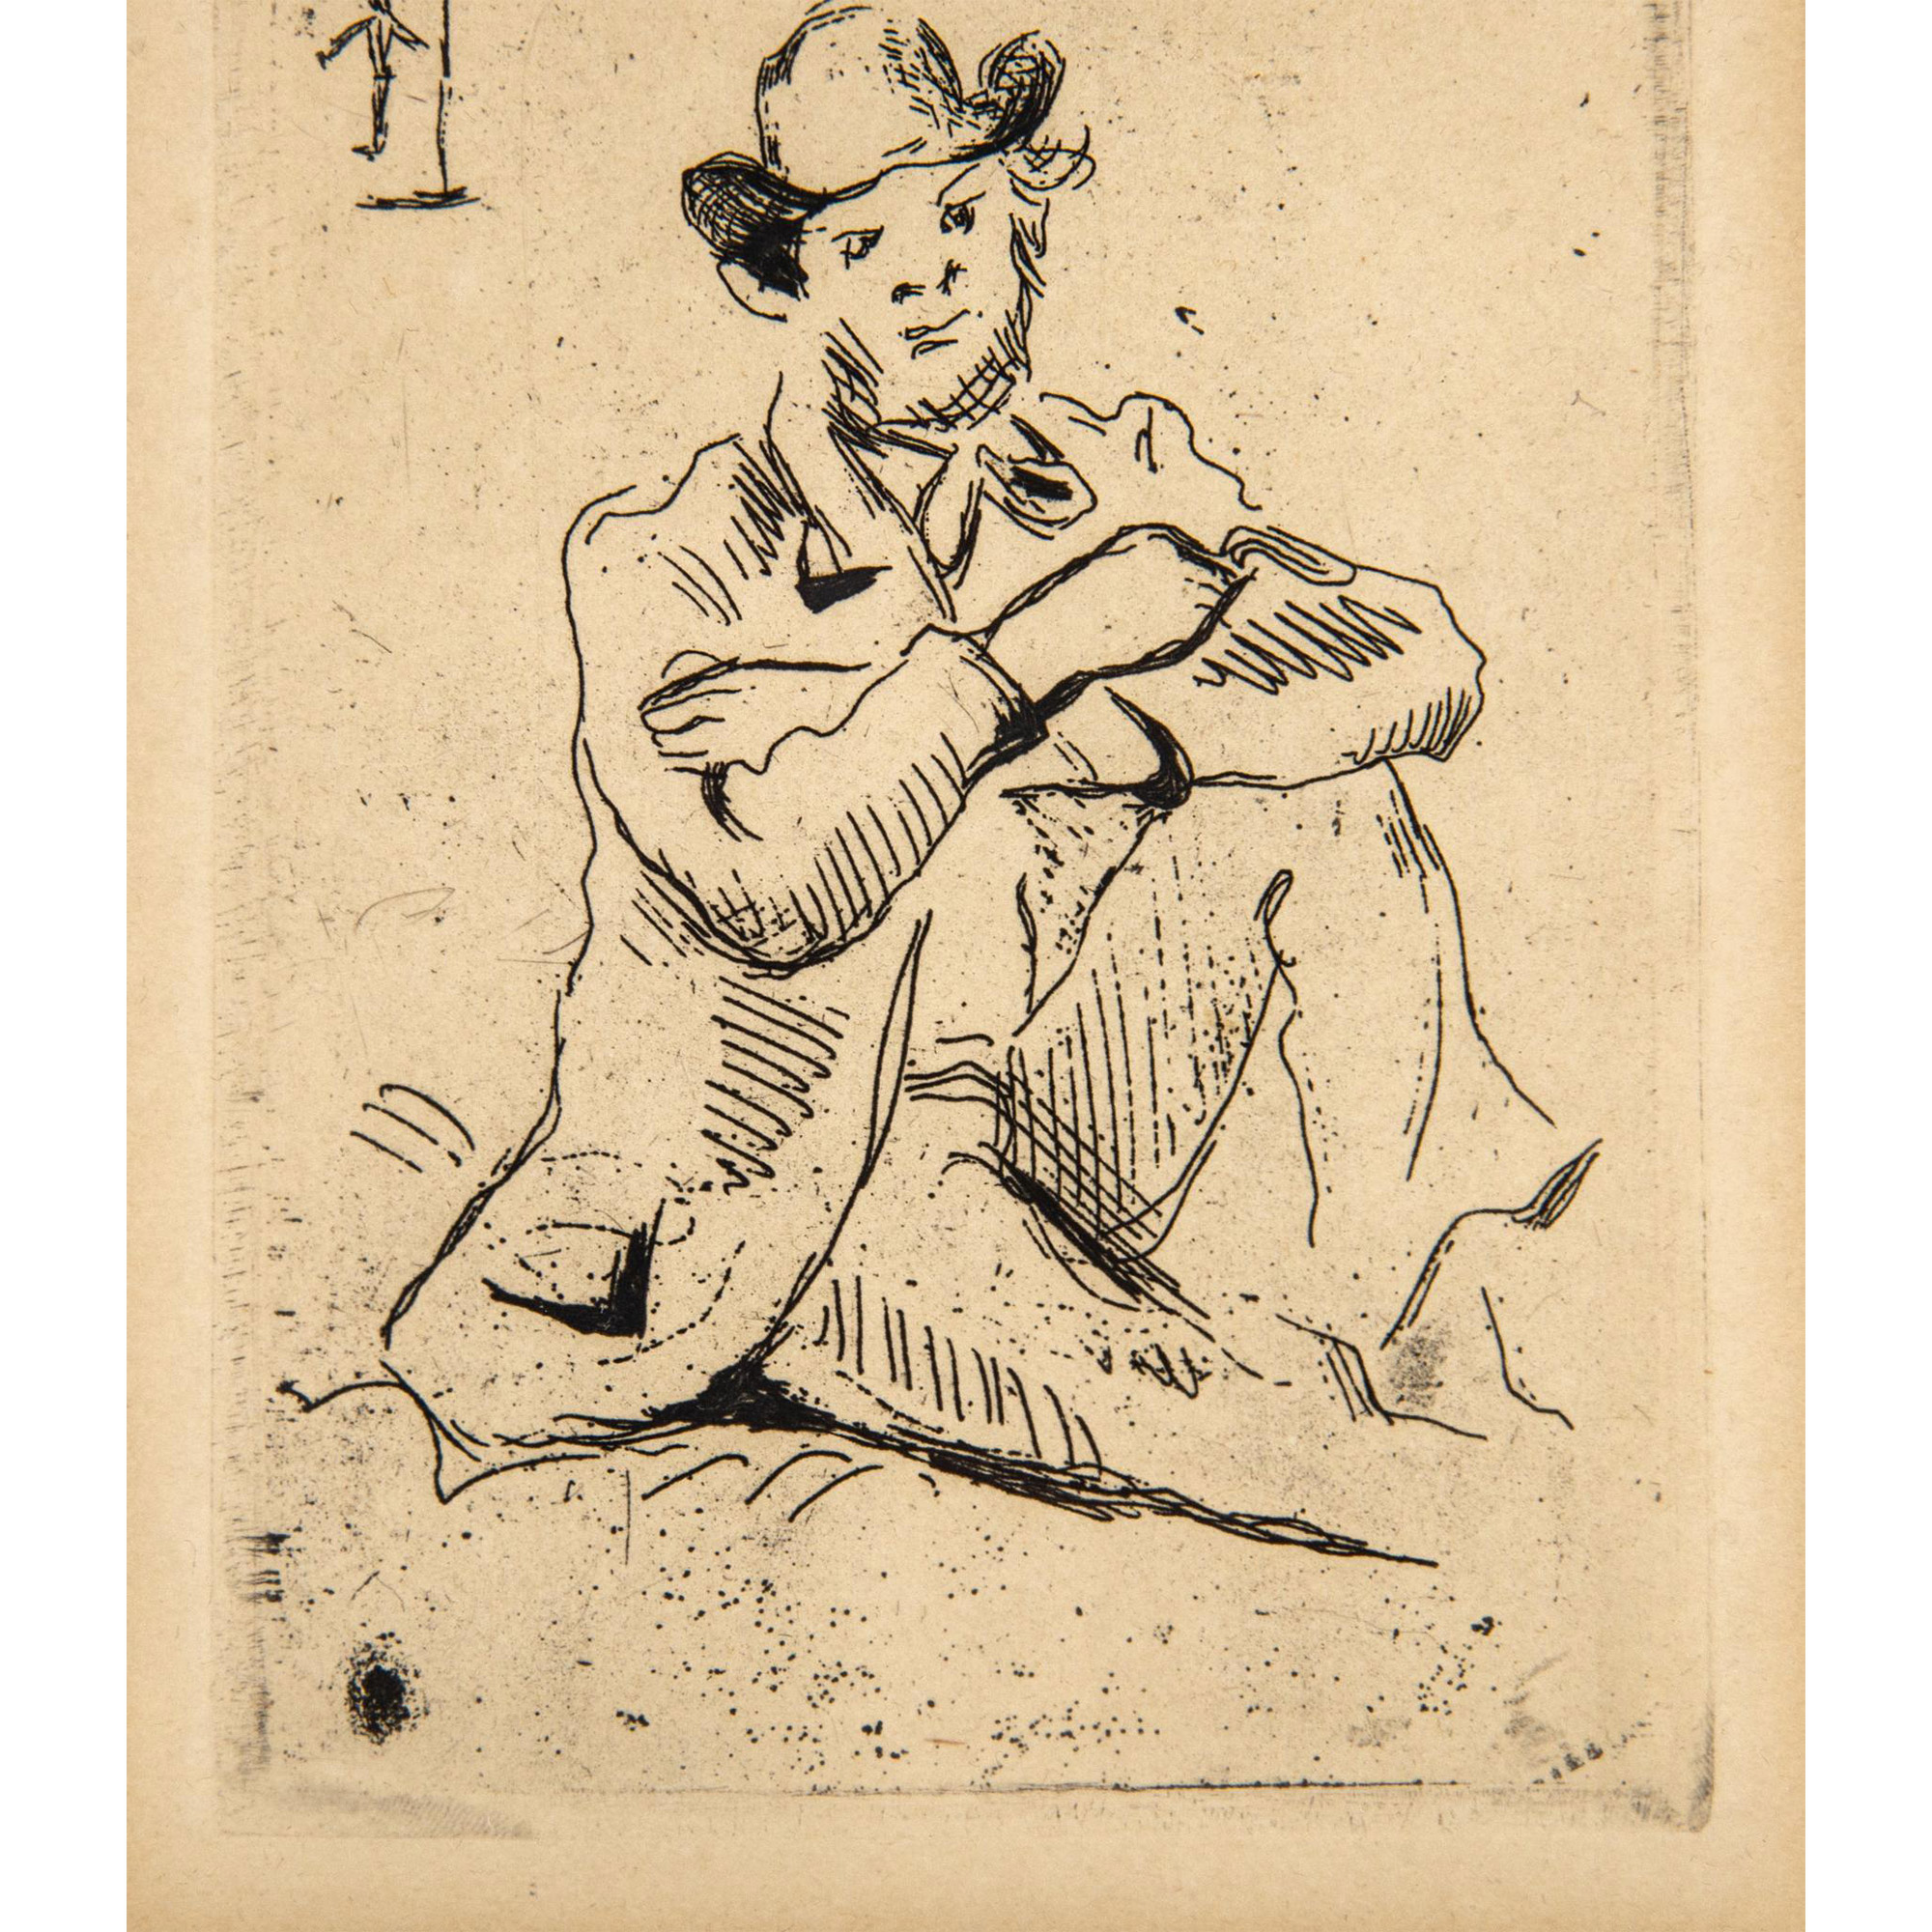 Paul Cezanne (Aft.) Drypoint Etching on Cream Paper - Image 4 of 5